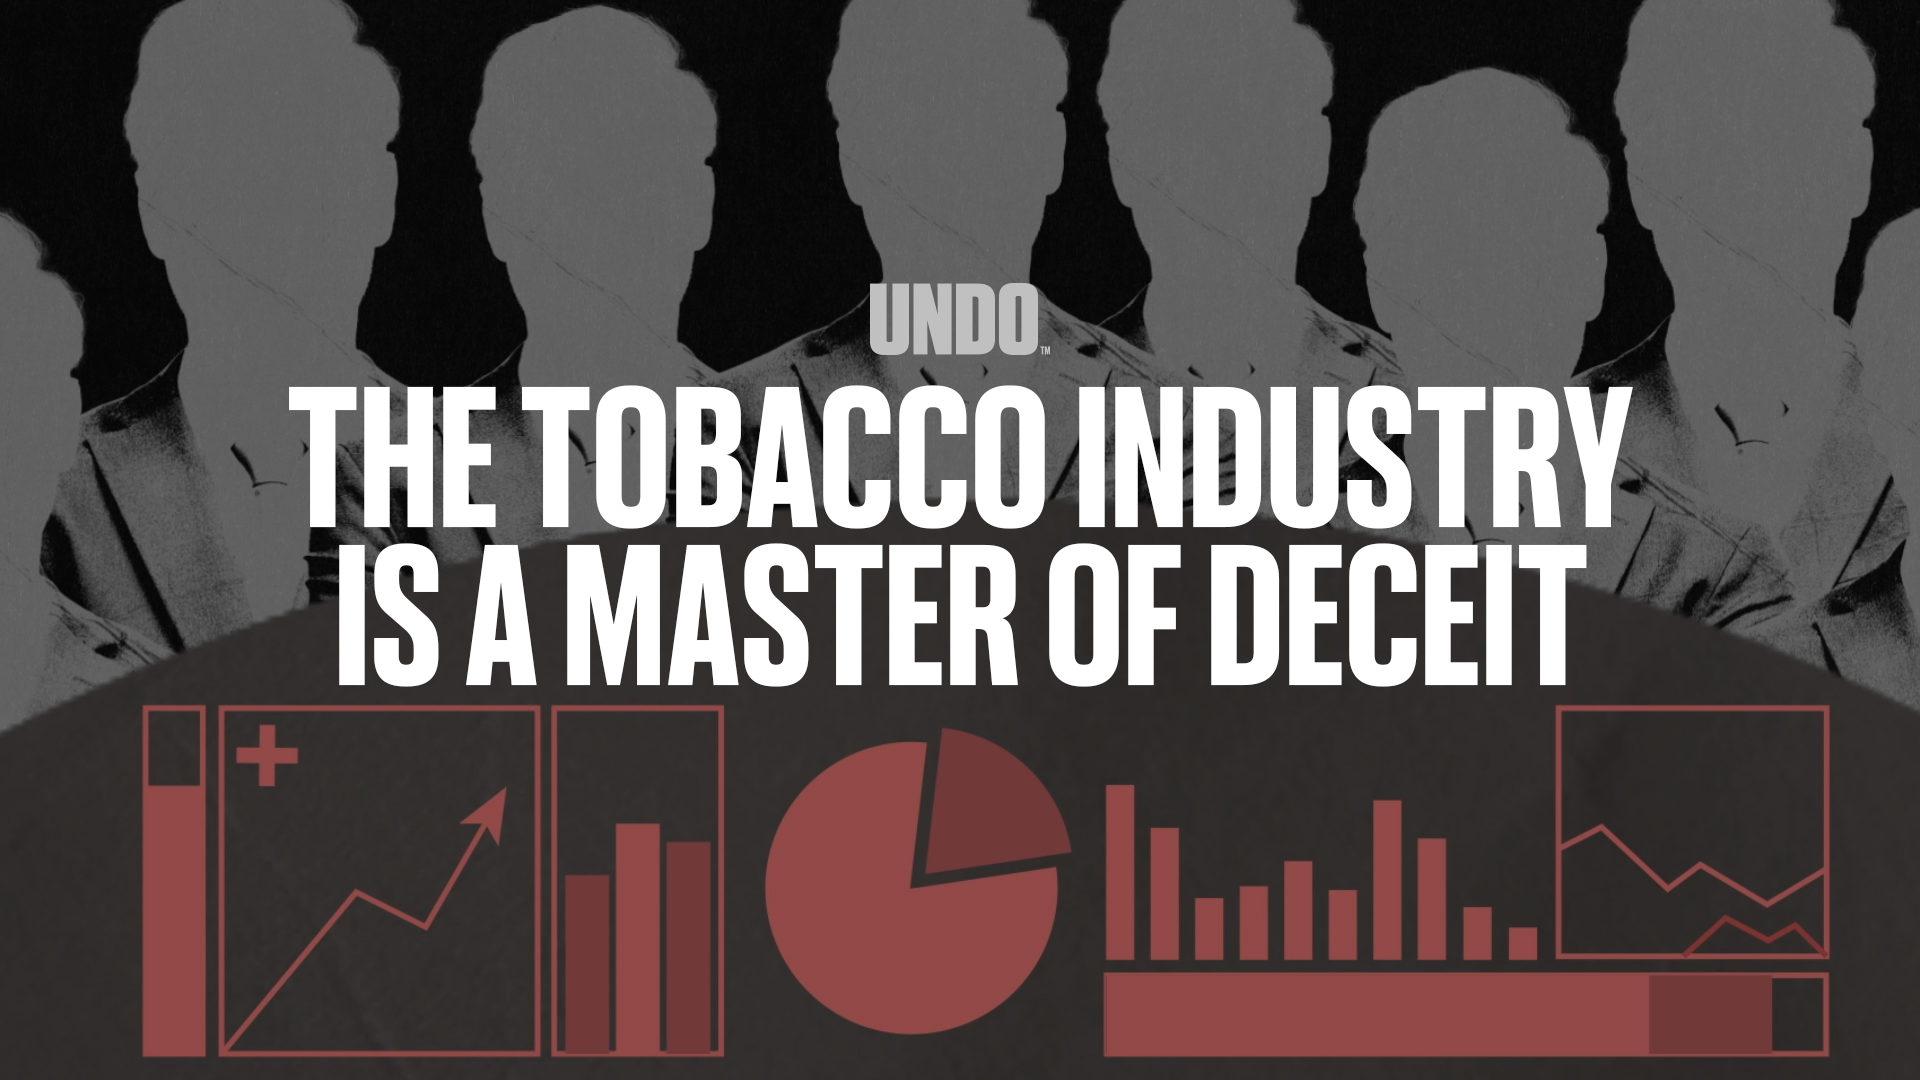 The tobacco industry is a master of deceit